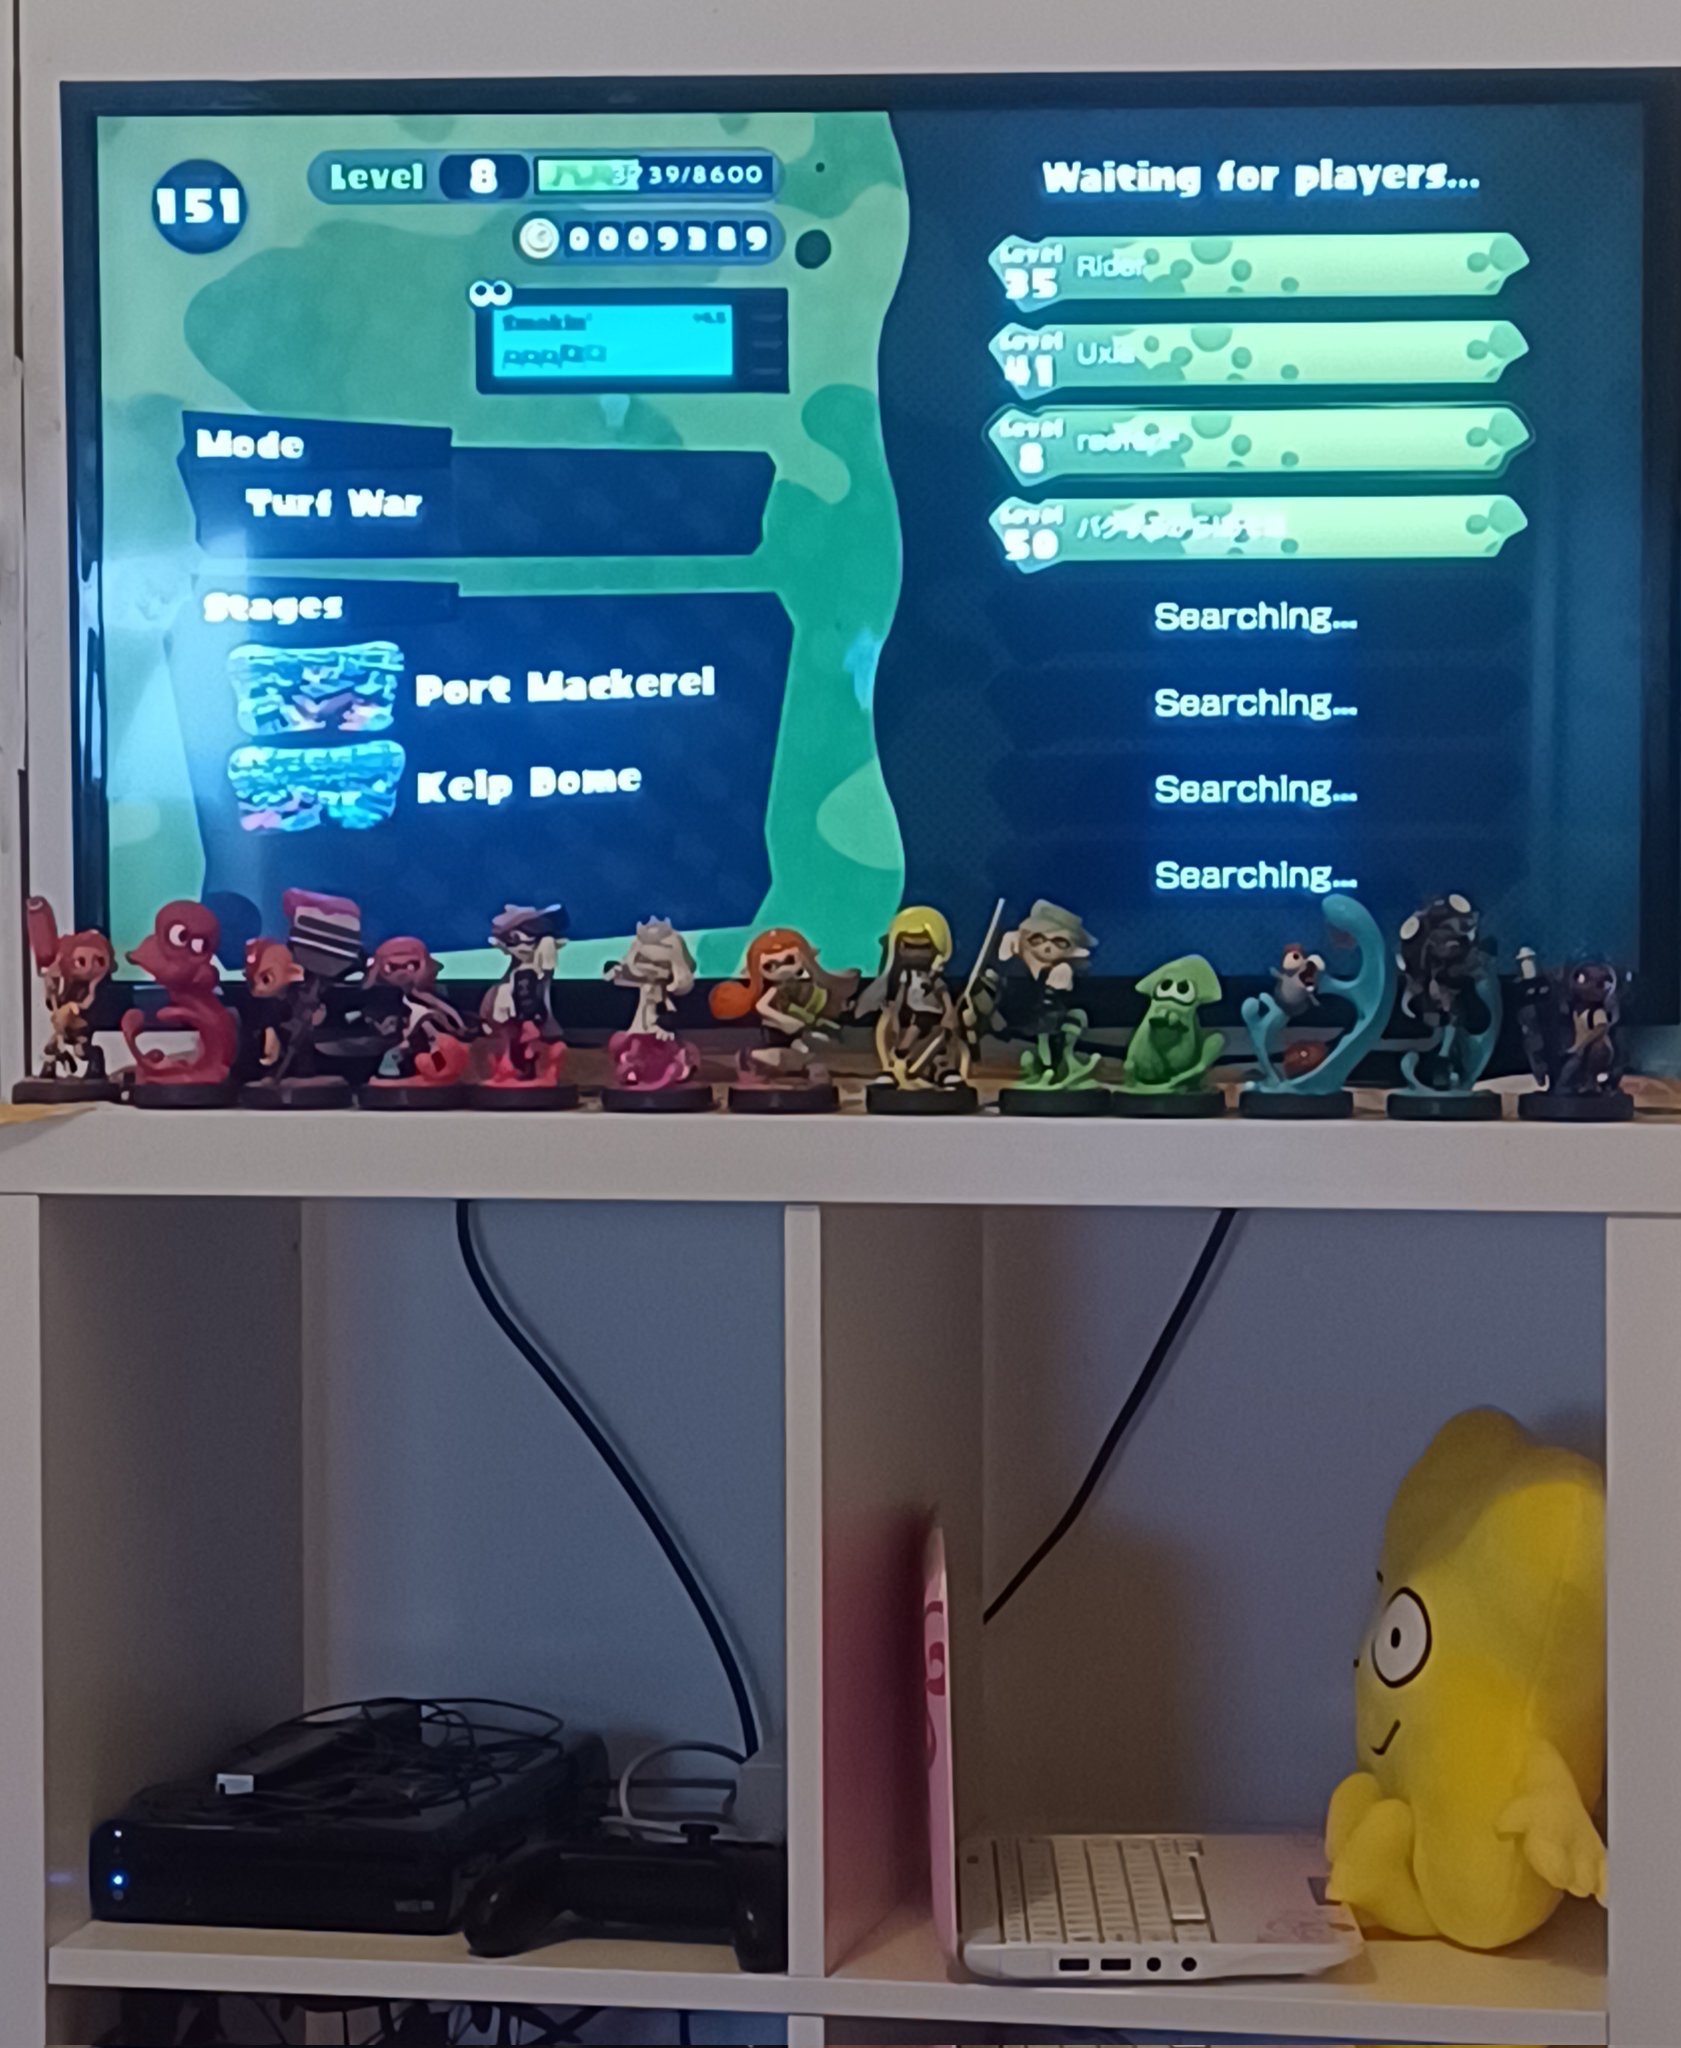 a photo of splatoon for wii u on a tv screen, in a Turf War lobby, with several splatoon amiibos in a rainbow line in front of it. the tv is on top of a stand which under it is separated into 4 compartments, although only the top 2 compartments are visible. in the leftmost compartment is the wii u, while in the rightmost compartment is a plushie of X from BFB at a disney asus EEEPC.